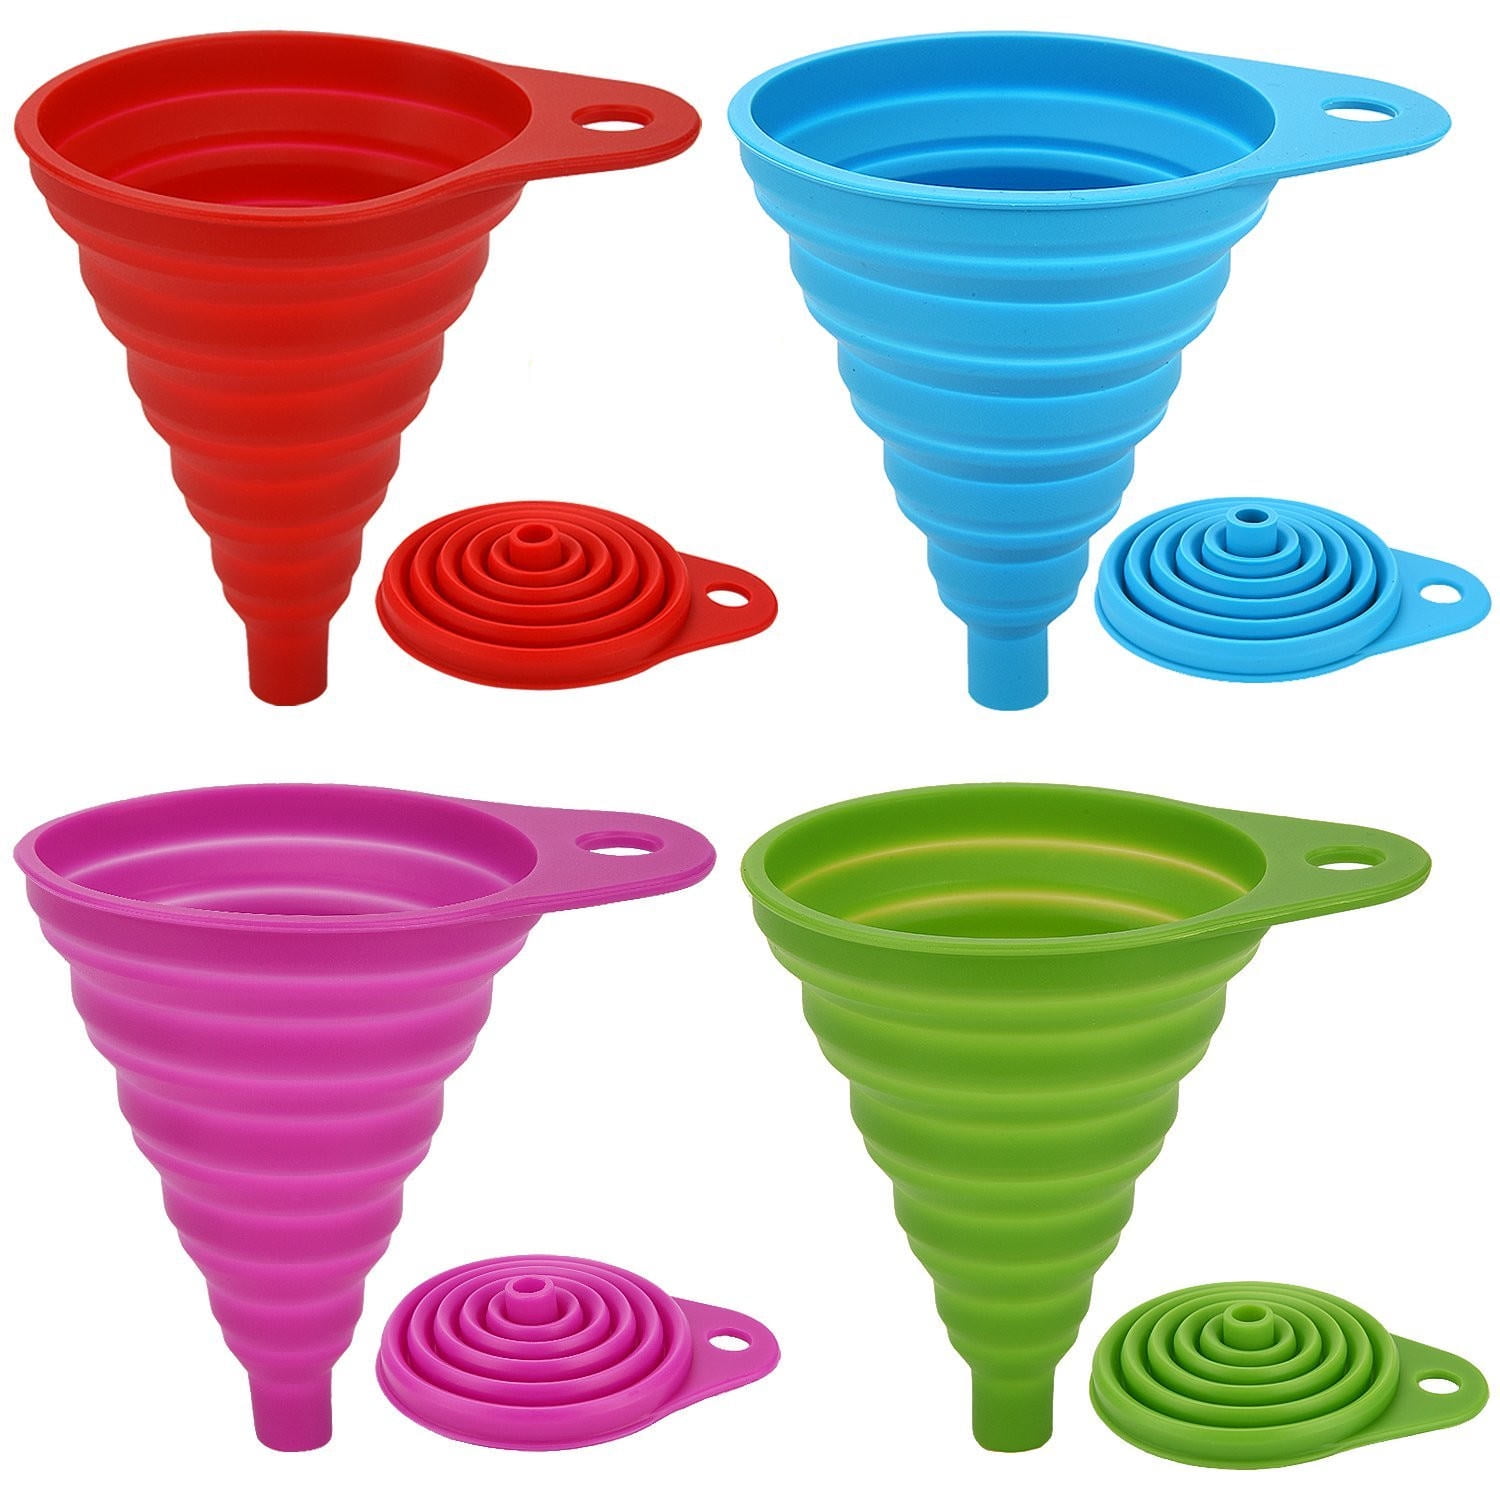 Useful Kitchen Mini Funnel Silicone Foldable Gel New Tool Funnelper Collapsible 